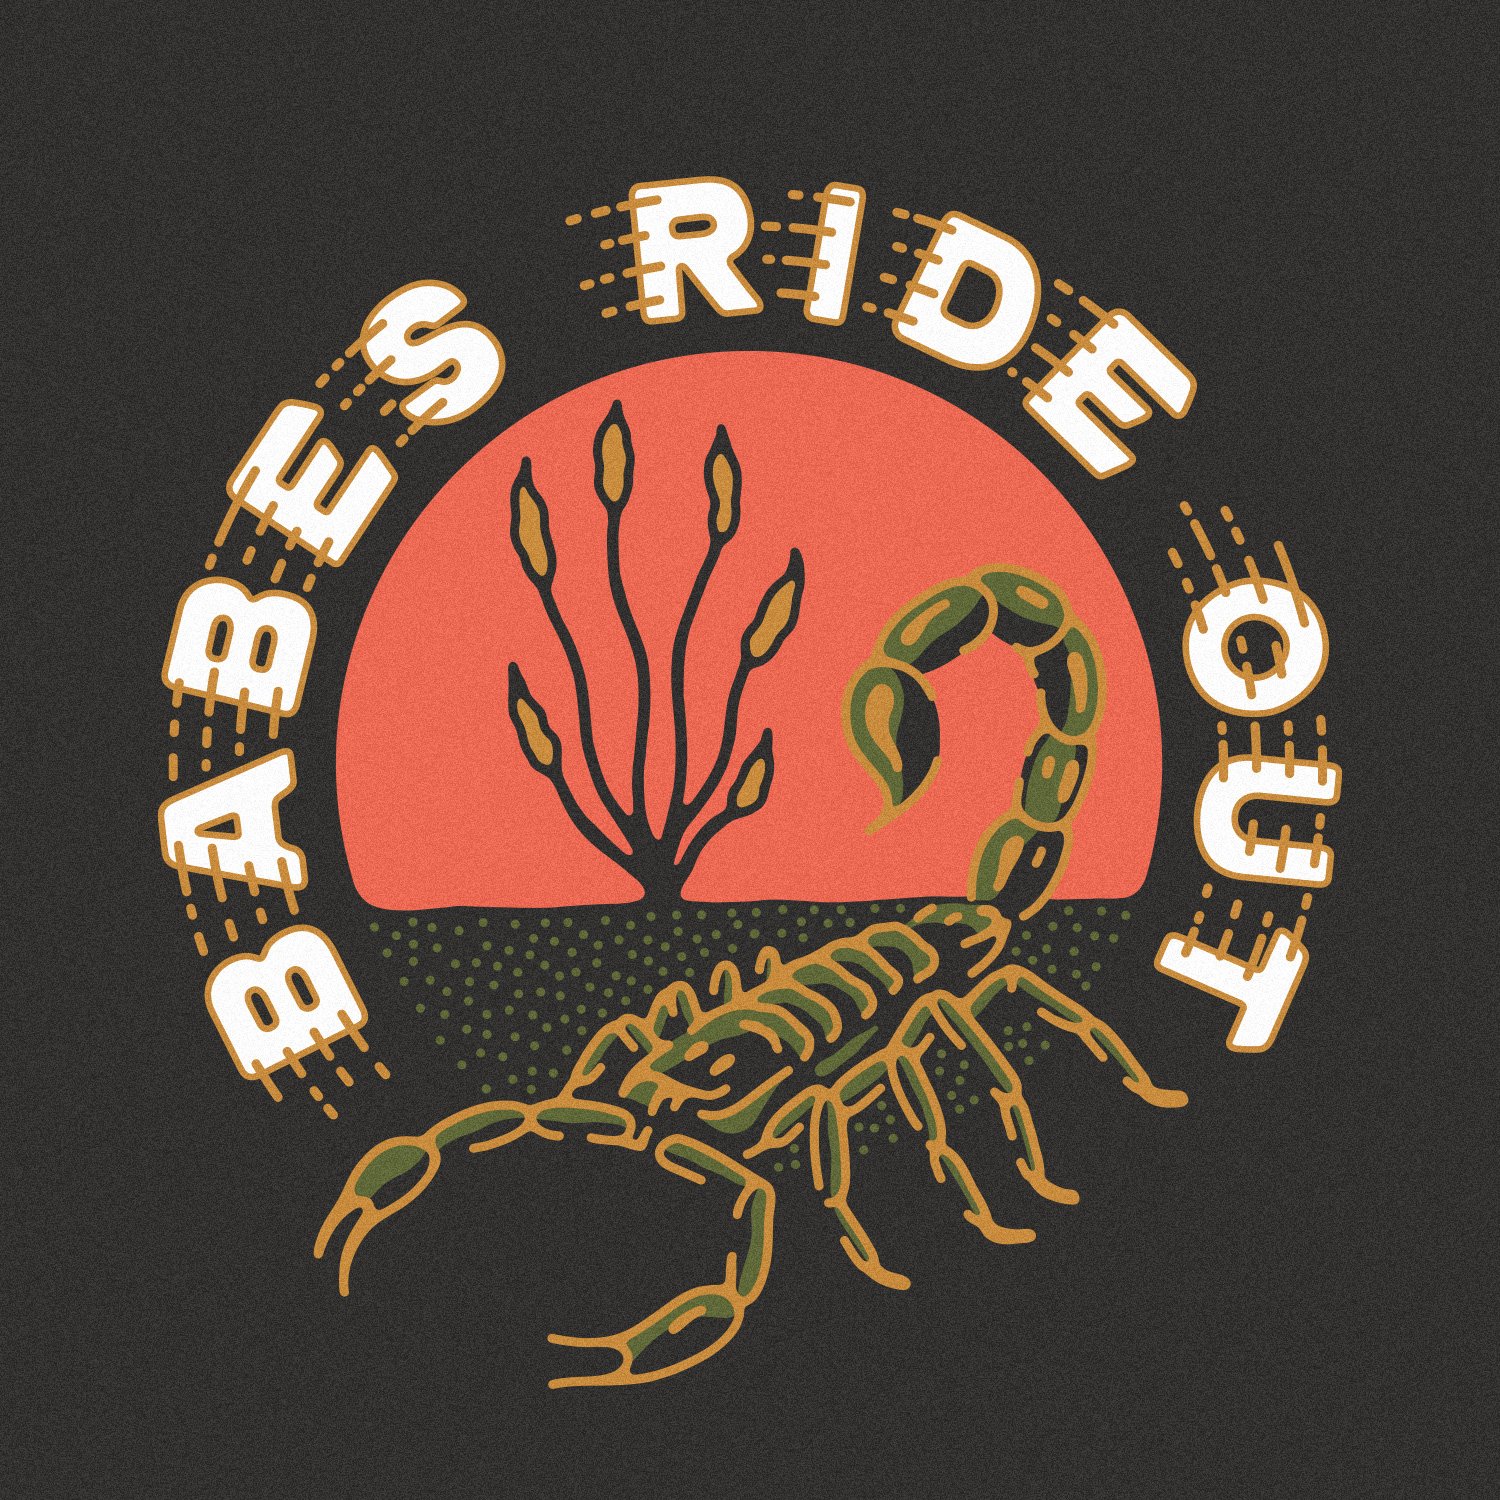  Babes Ride Out scorpion merch design by Cactus Country. 